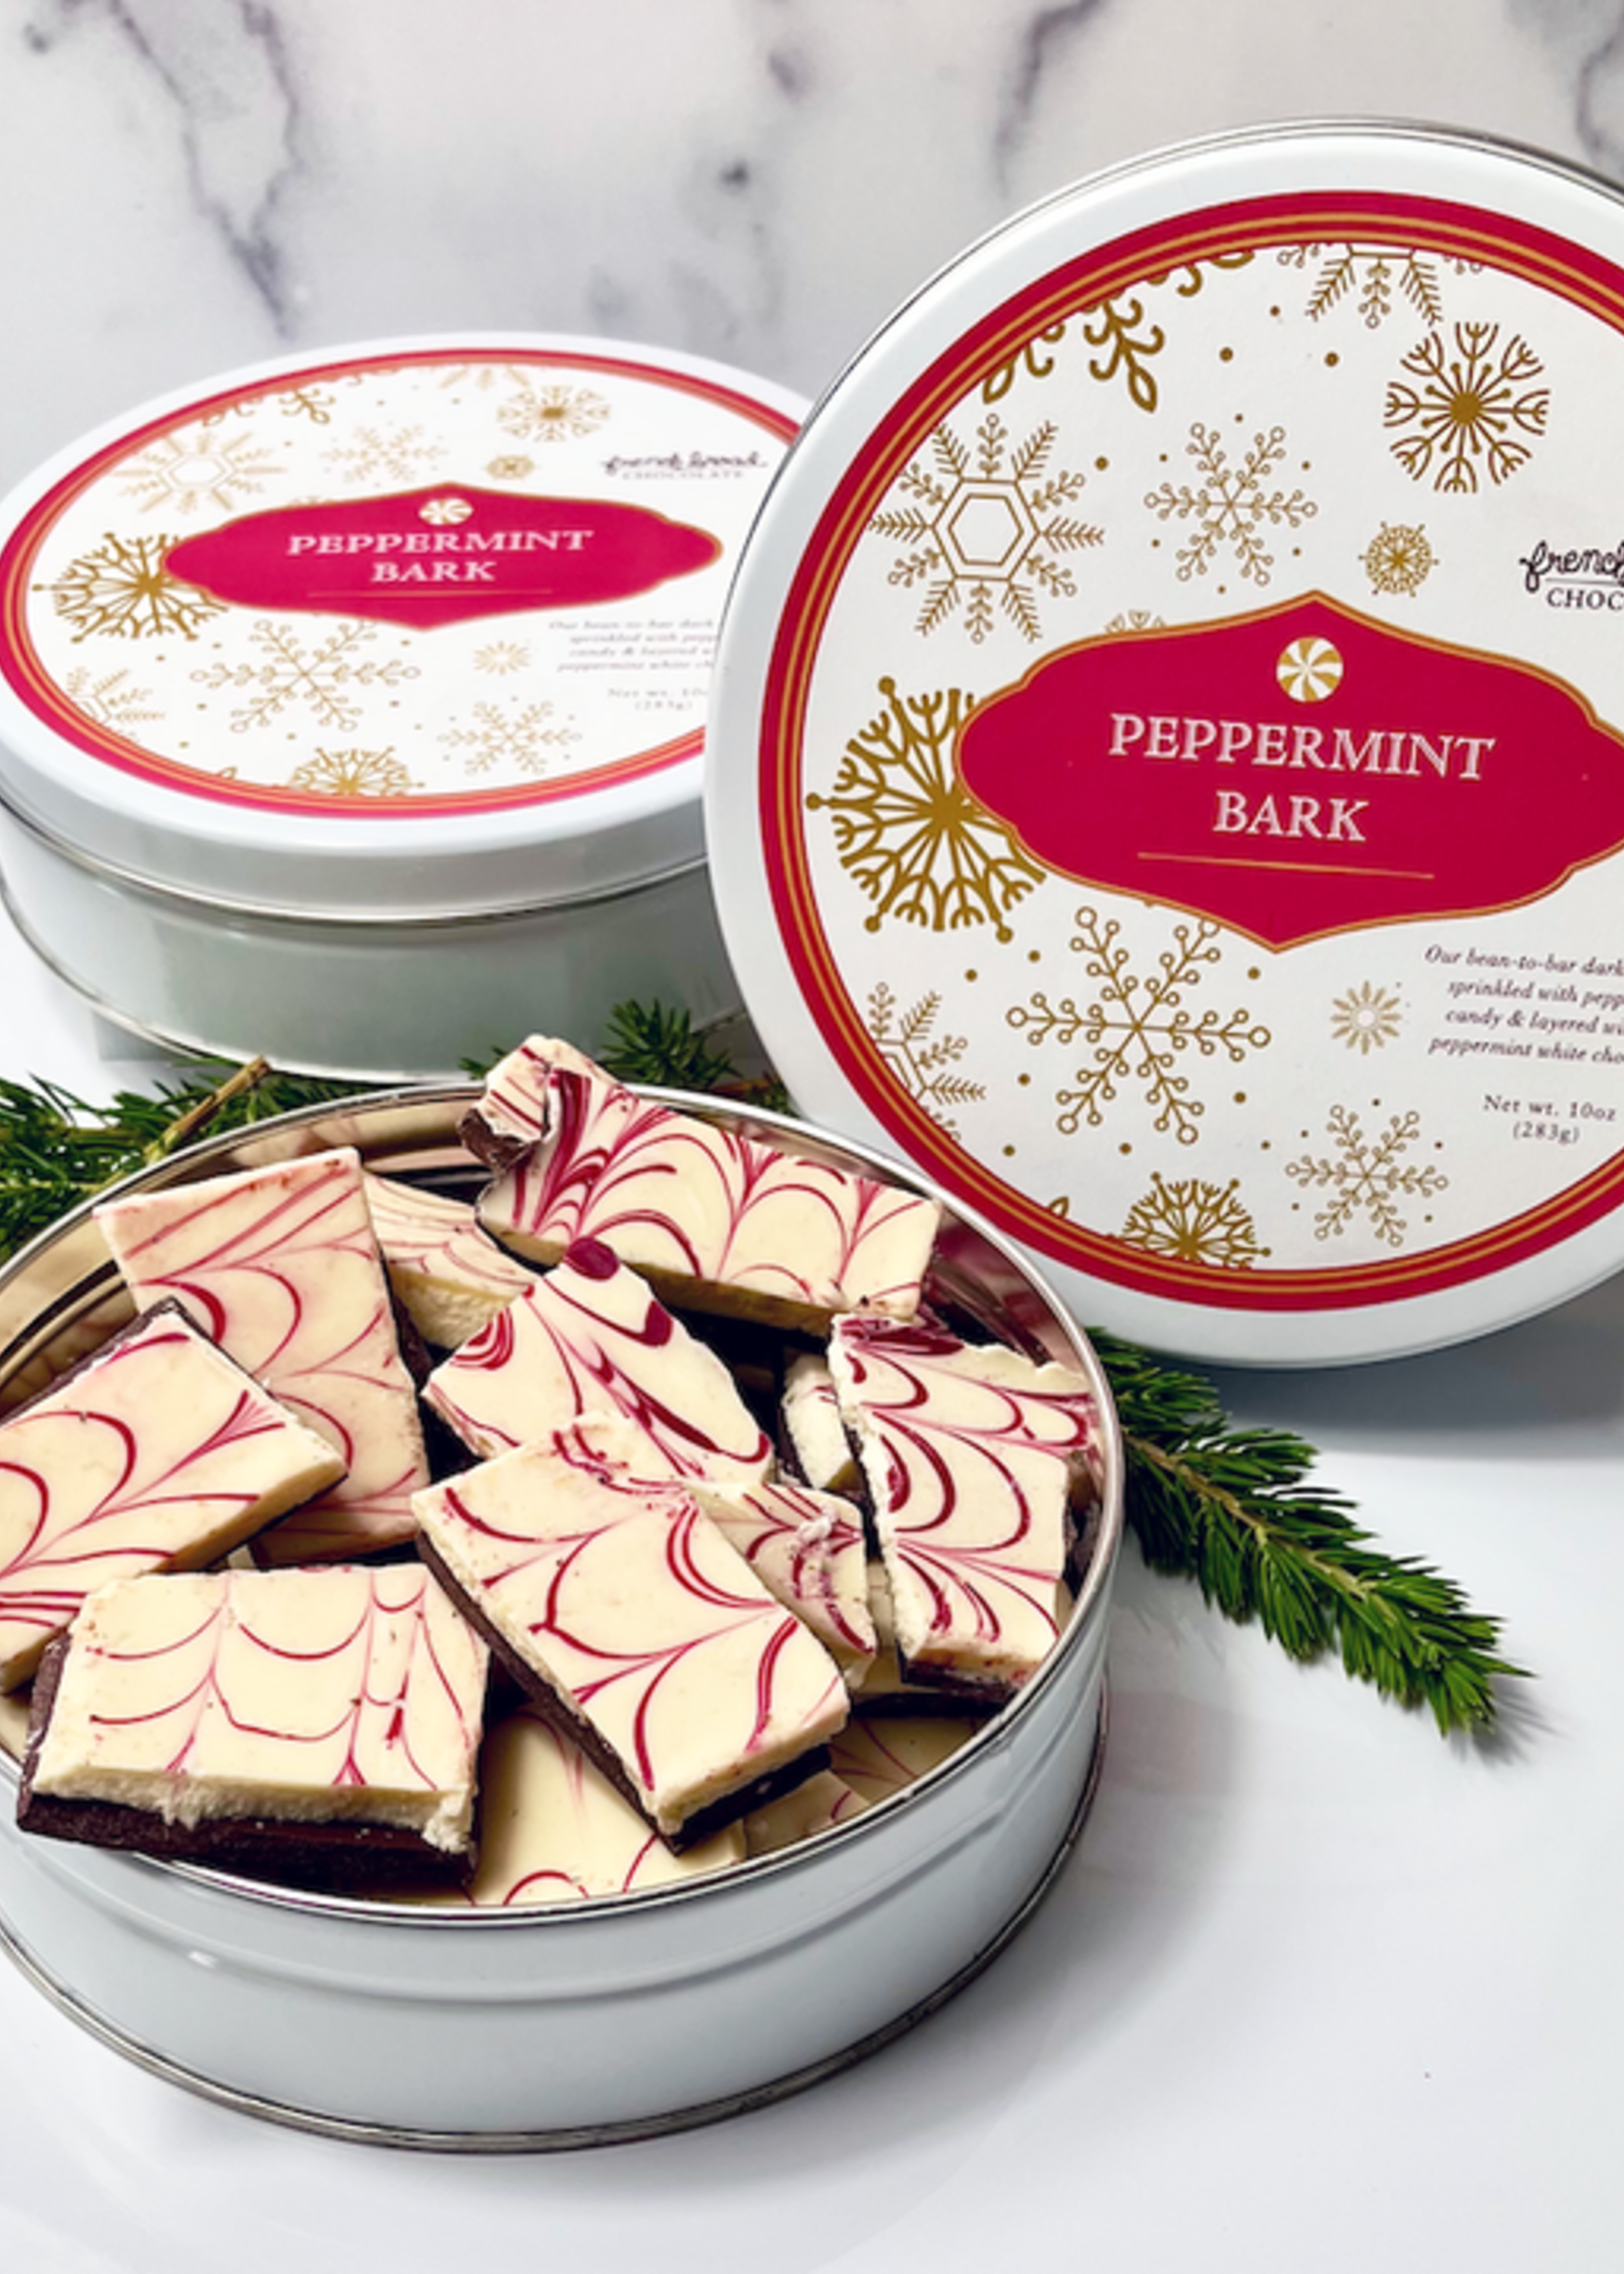 French Broad Chocolates Peppermint Bark Tin